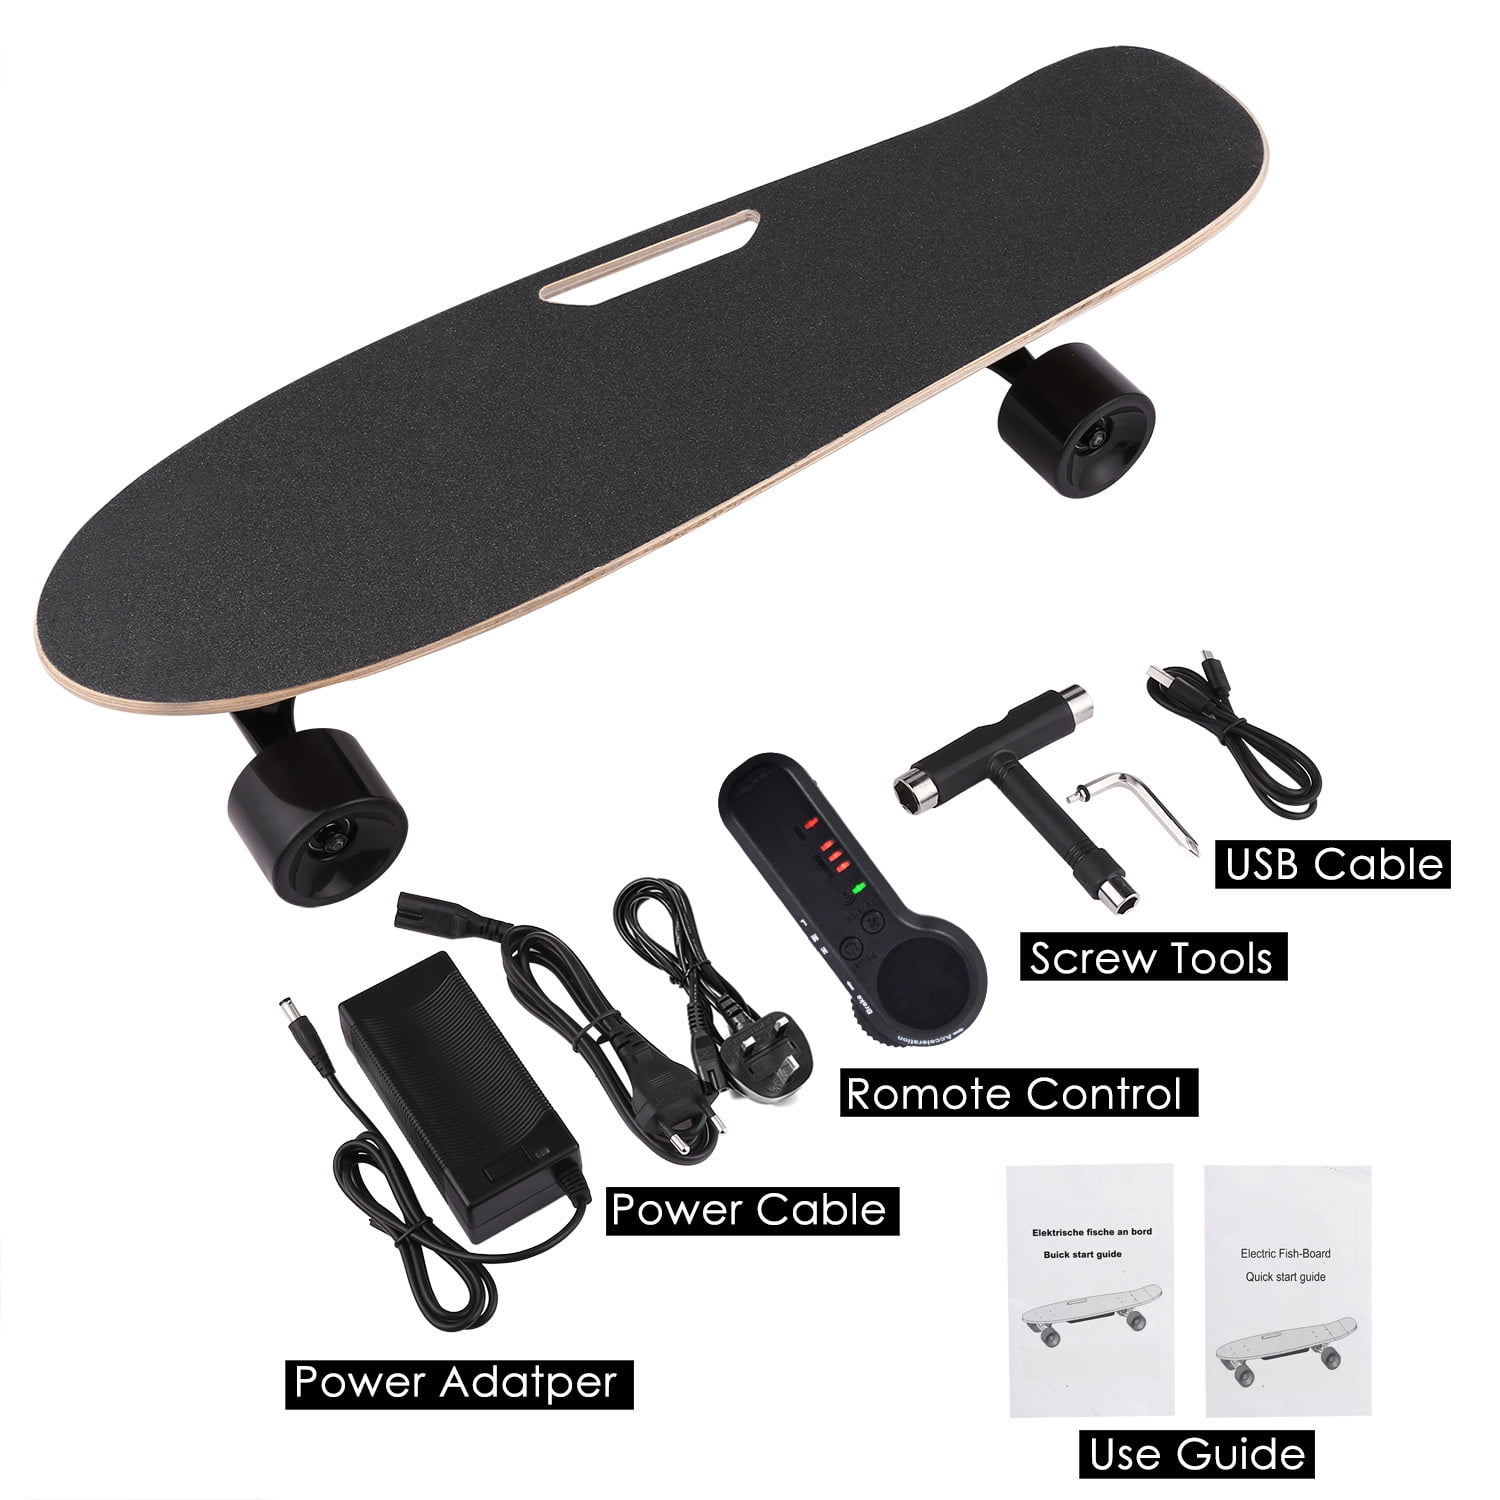 Vul in machine natuurkundige Youth Electric Skateboard with Wireless Remote Control 7 Layers Maple  E-Skateboard for Teens, 350W Motor, 12.5 MPH Top Speed, Max Load 180lbs  Christmas Gifts for Kids - Walmart.com